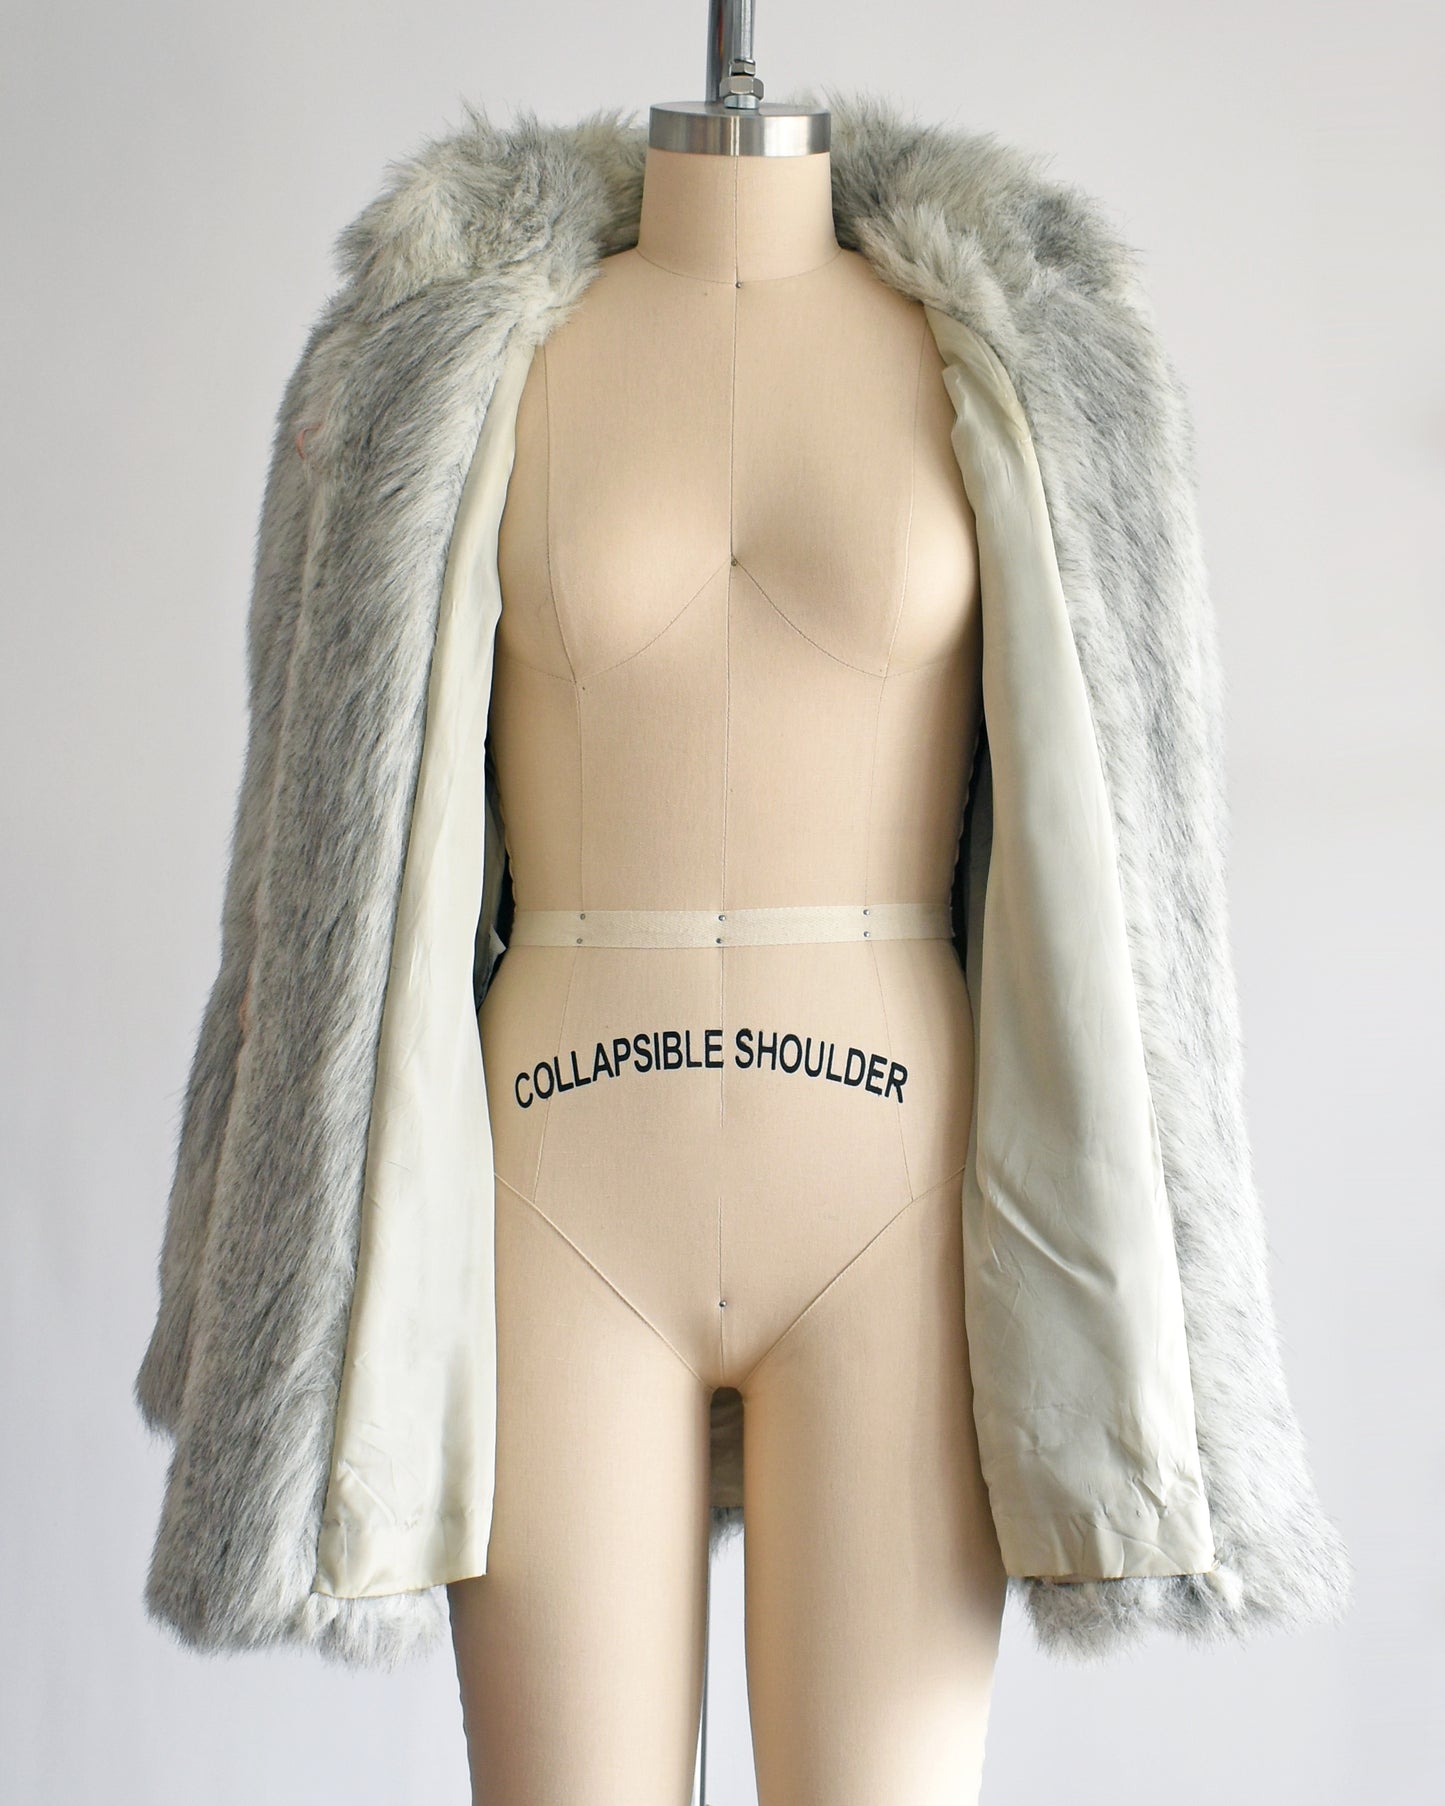 A vintage 1980s faux fur coat that features a plush white faux fur with light and dark gray stripes, a high collar, and structured puffed shoulders. The coat is unbuttoned showing the gray lining.